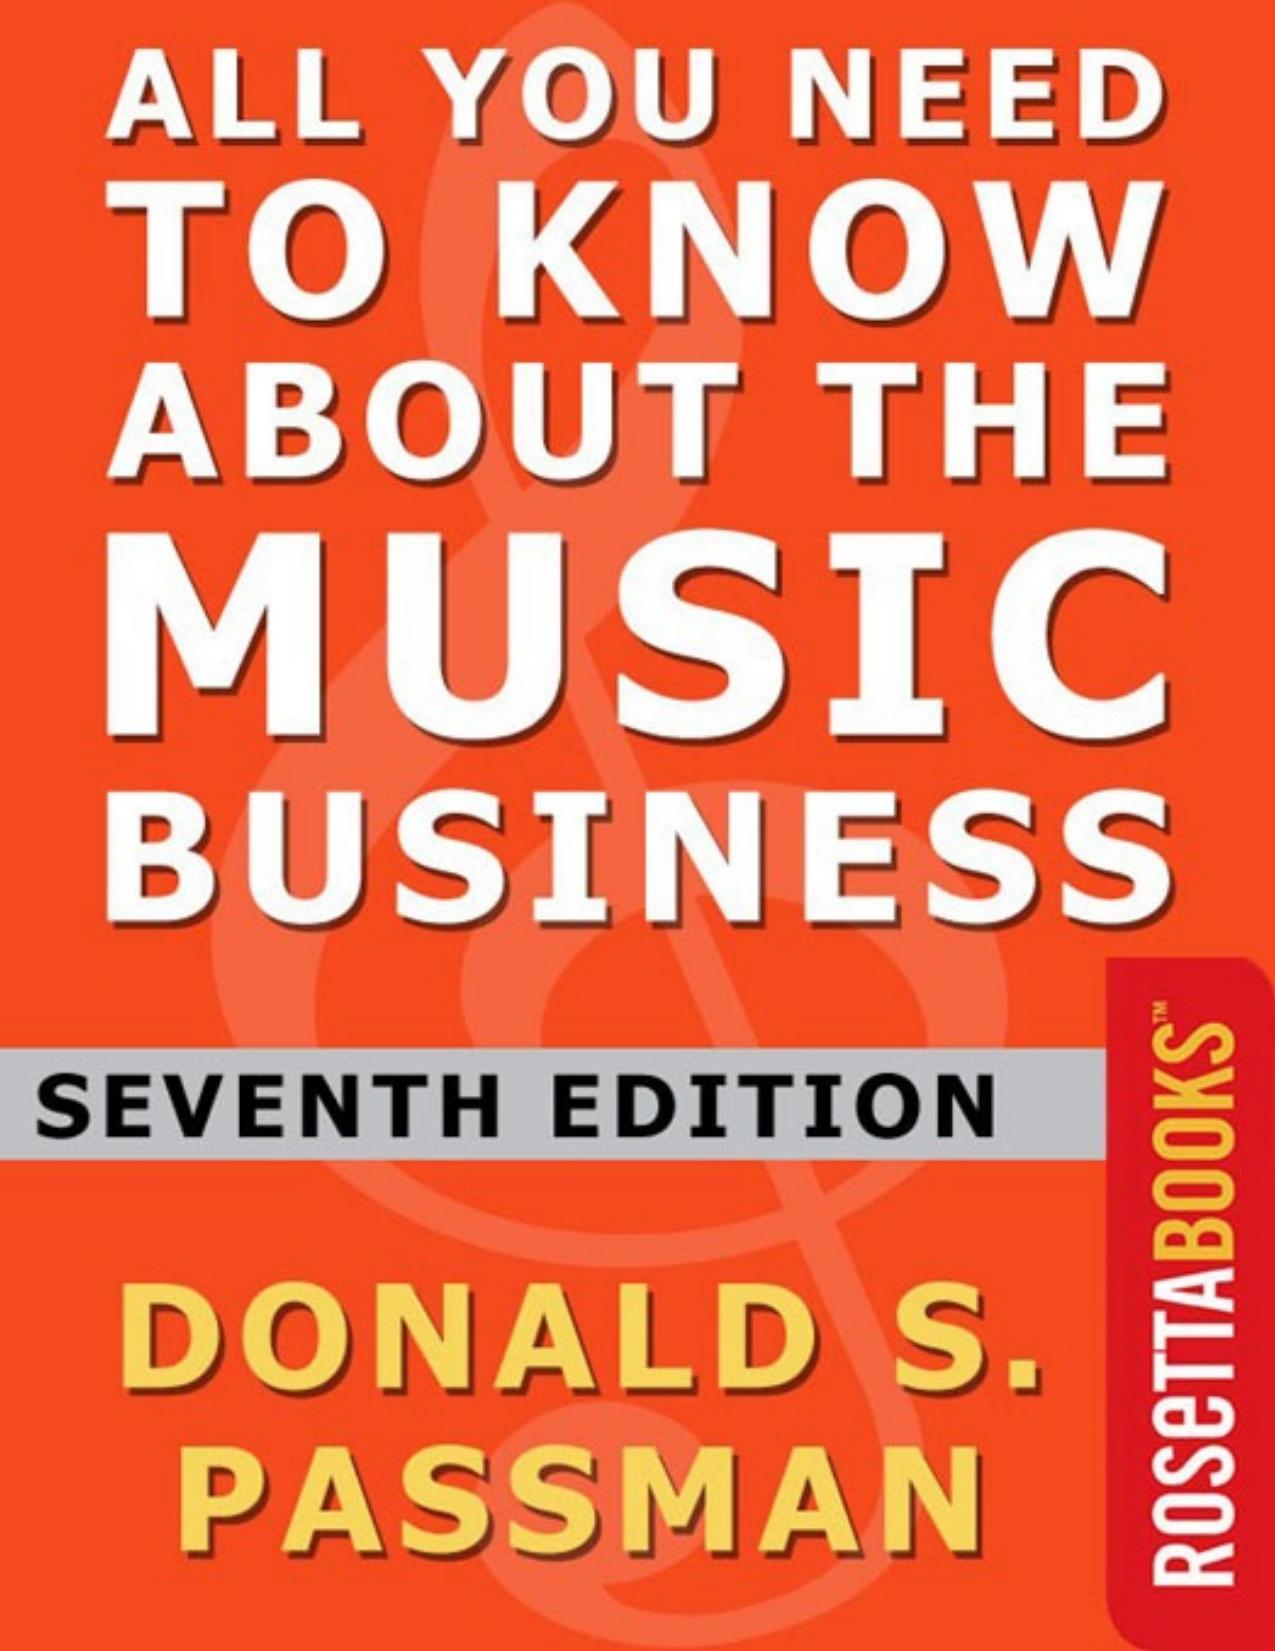 All You Need to Know About the Music Business by Donald S. Passman